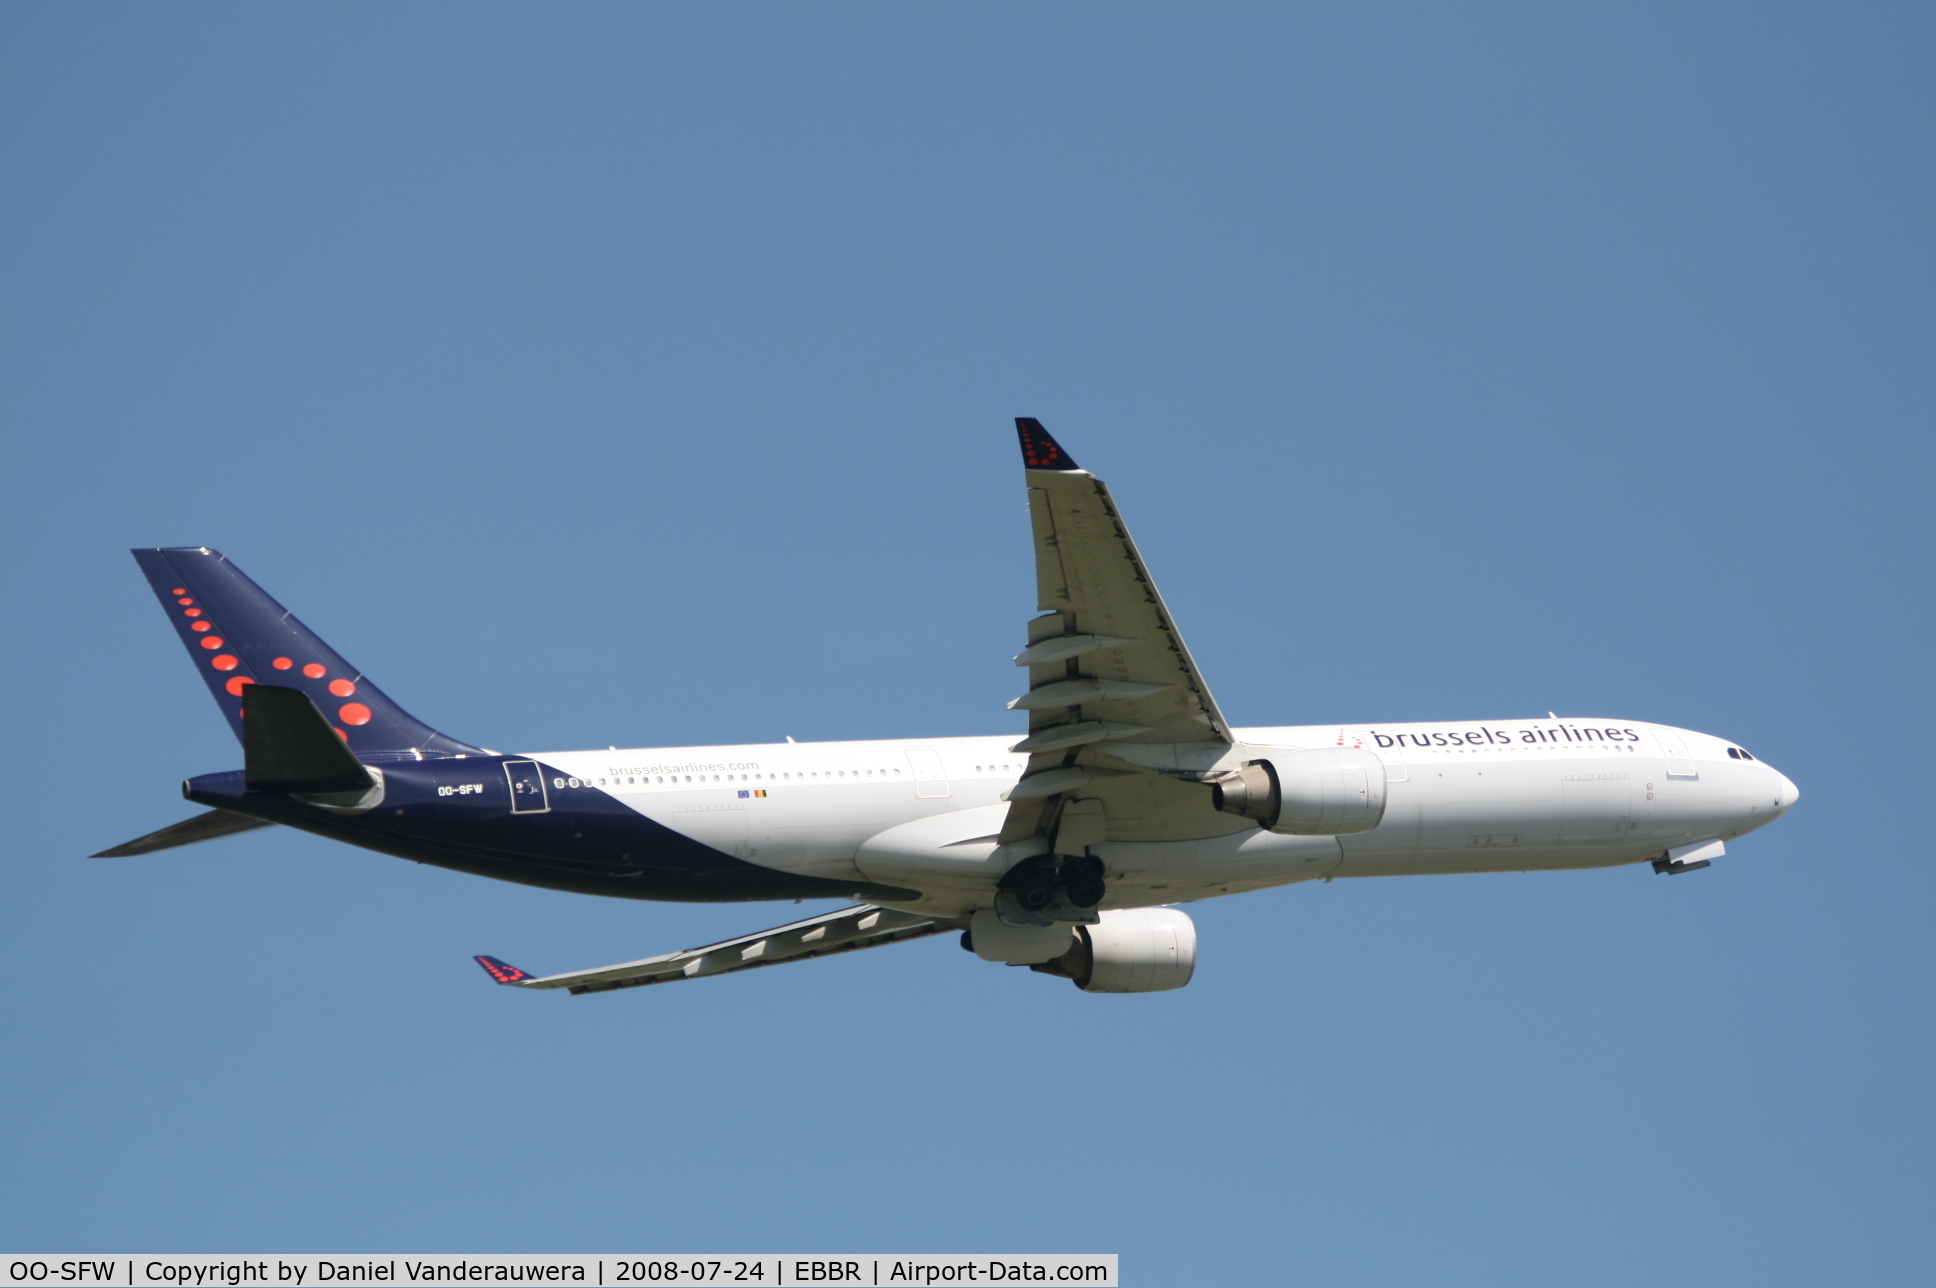 OO-SFW, 1994 Airbus A330-322 C/N 82, flight SN203 is taking off from rwy 07R